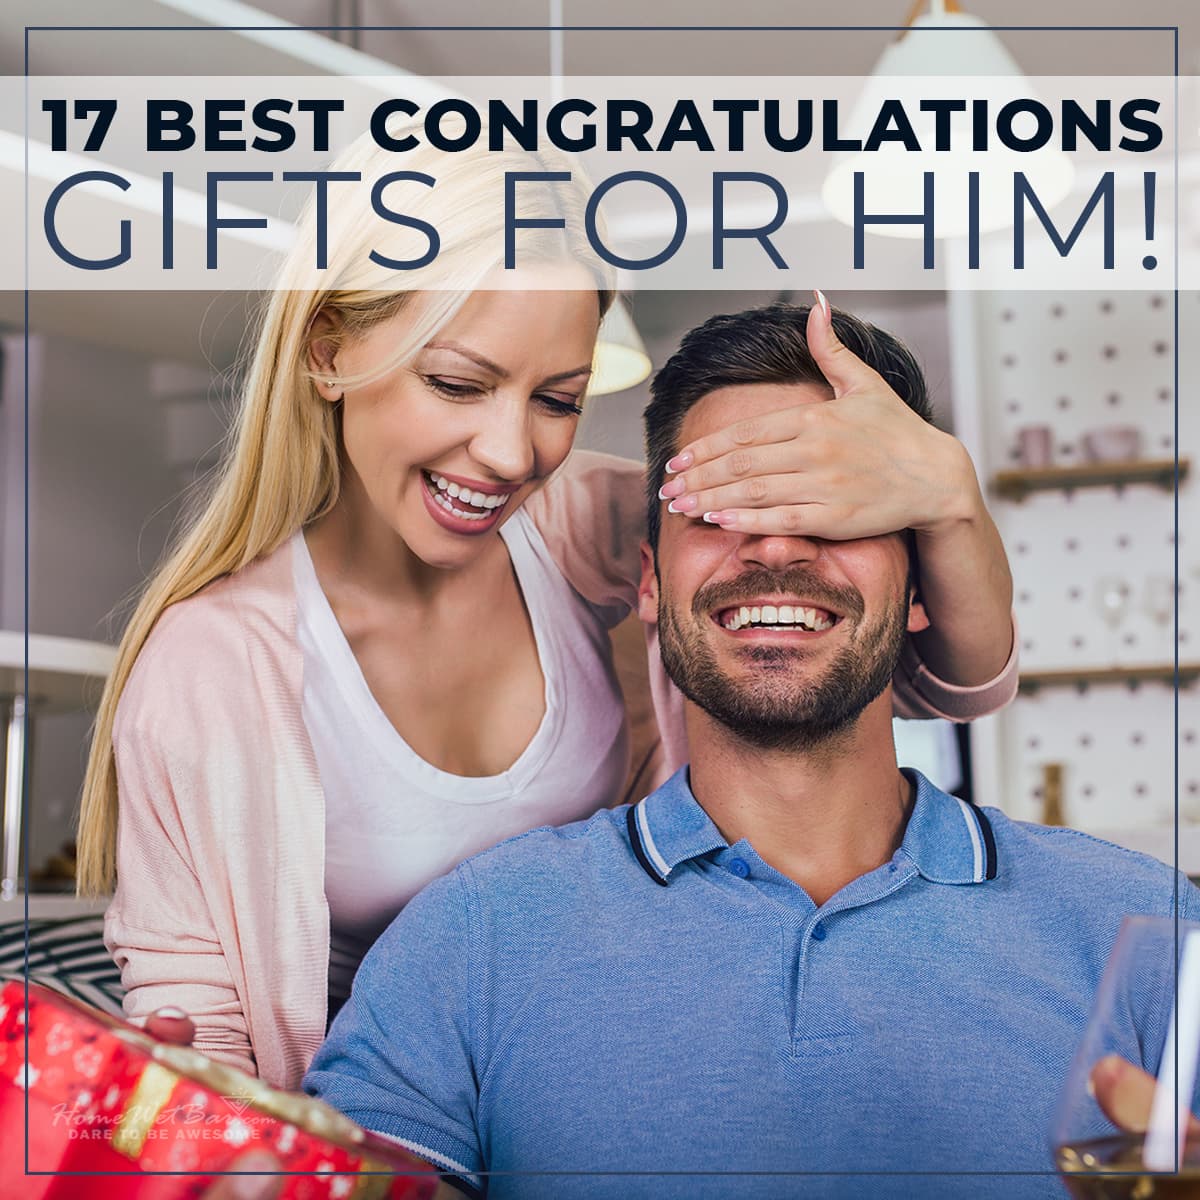 17 Best Congratulation Gift for Him